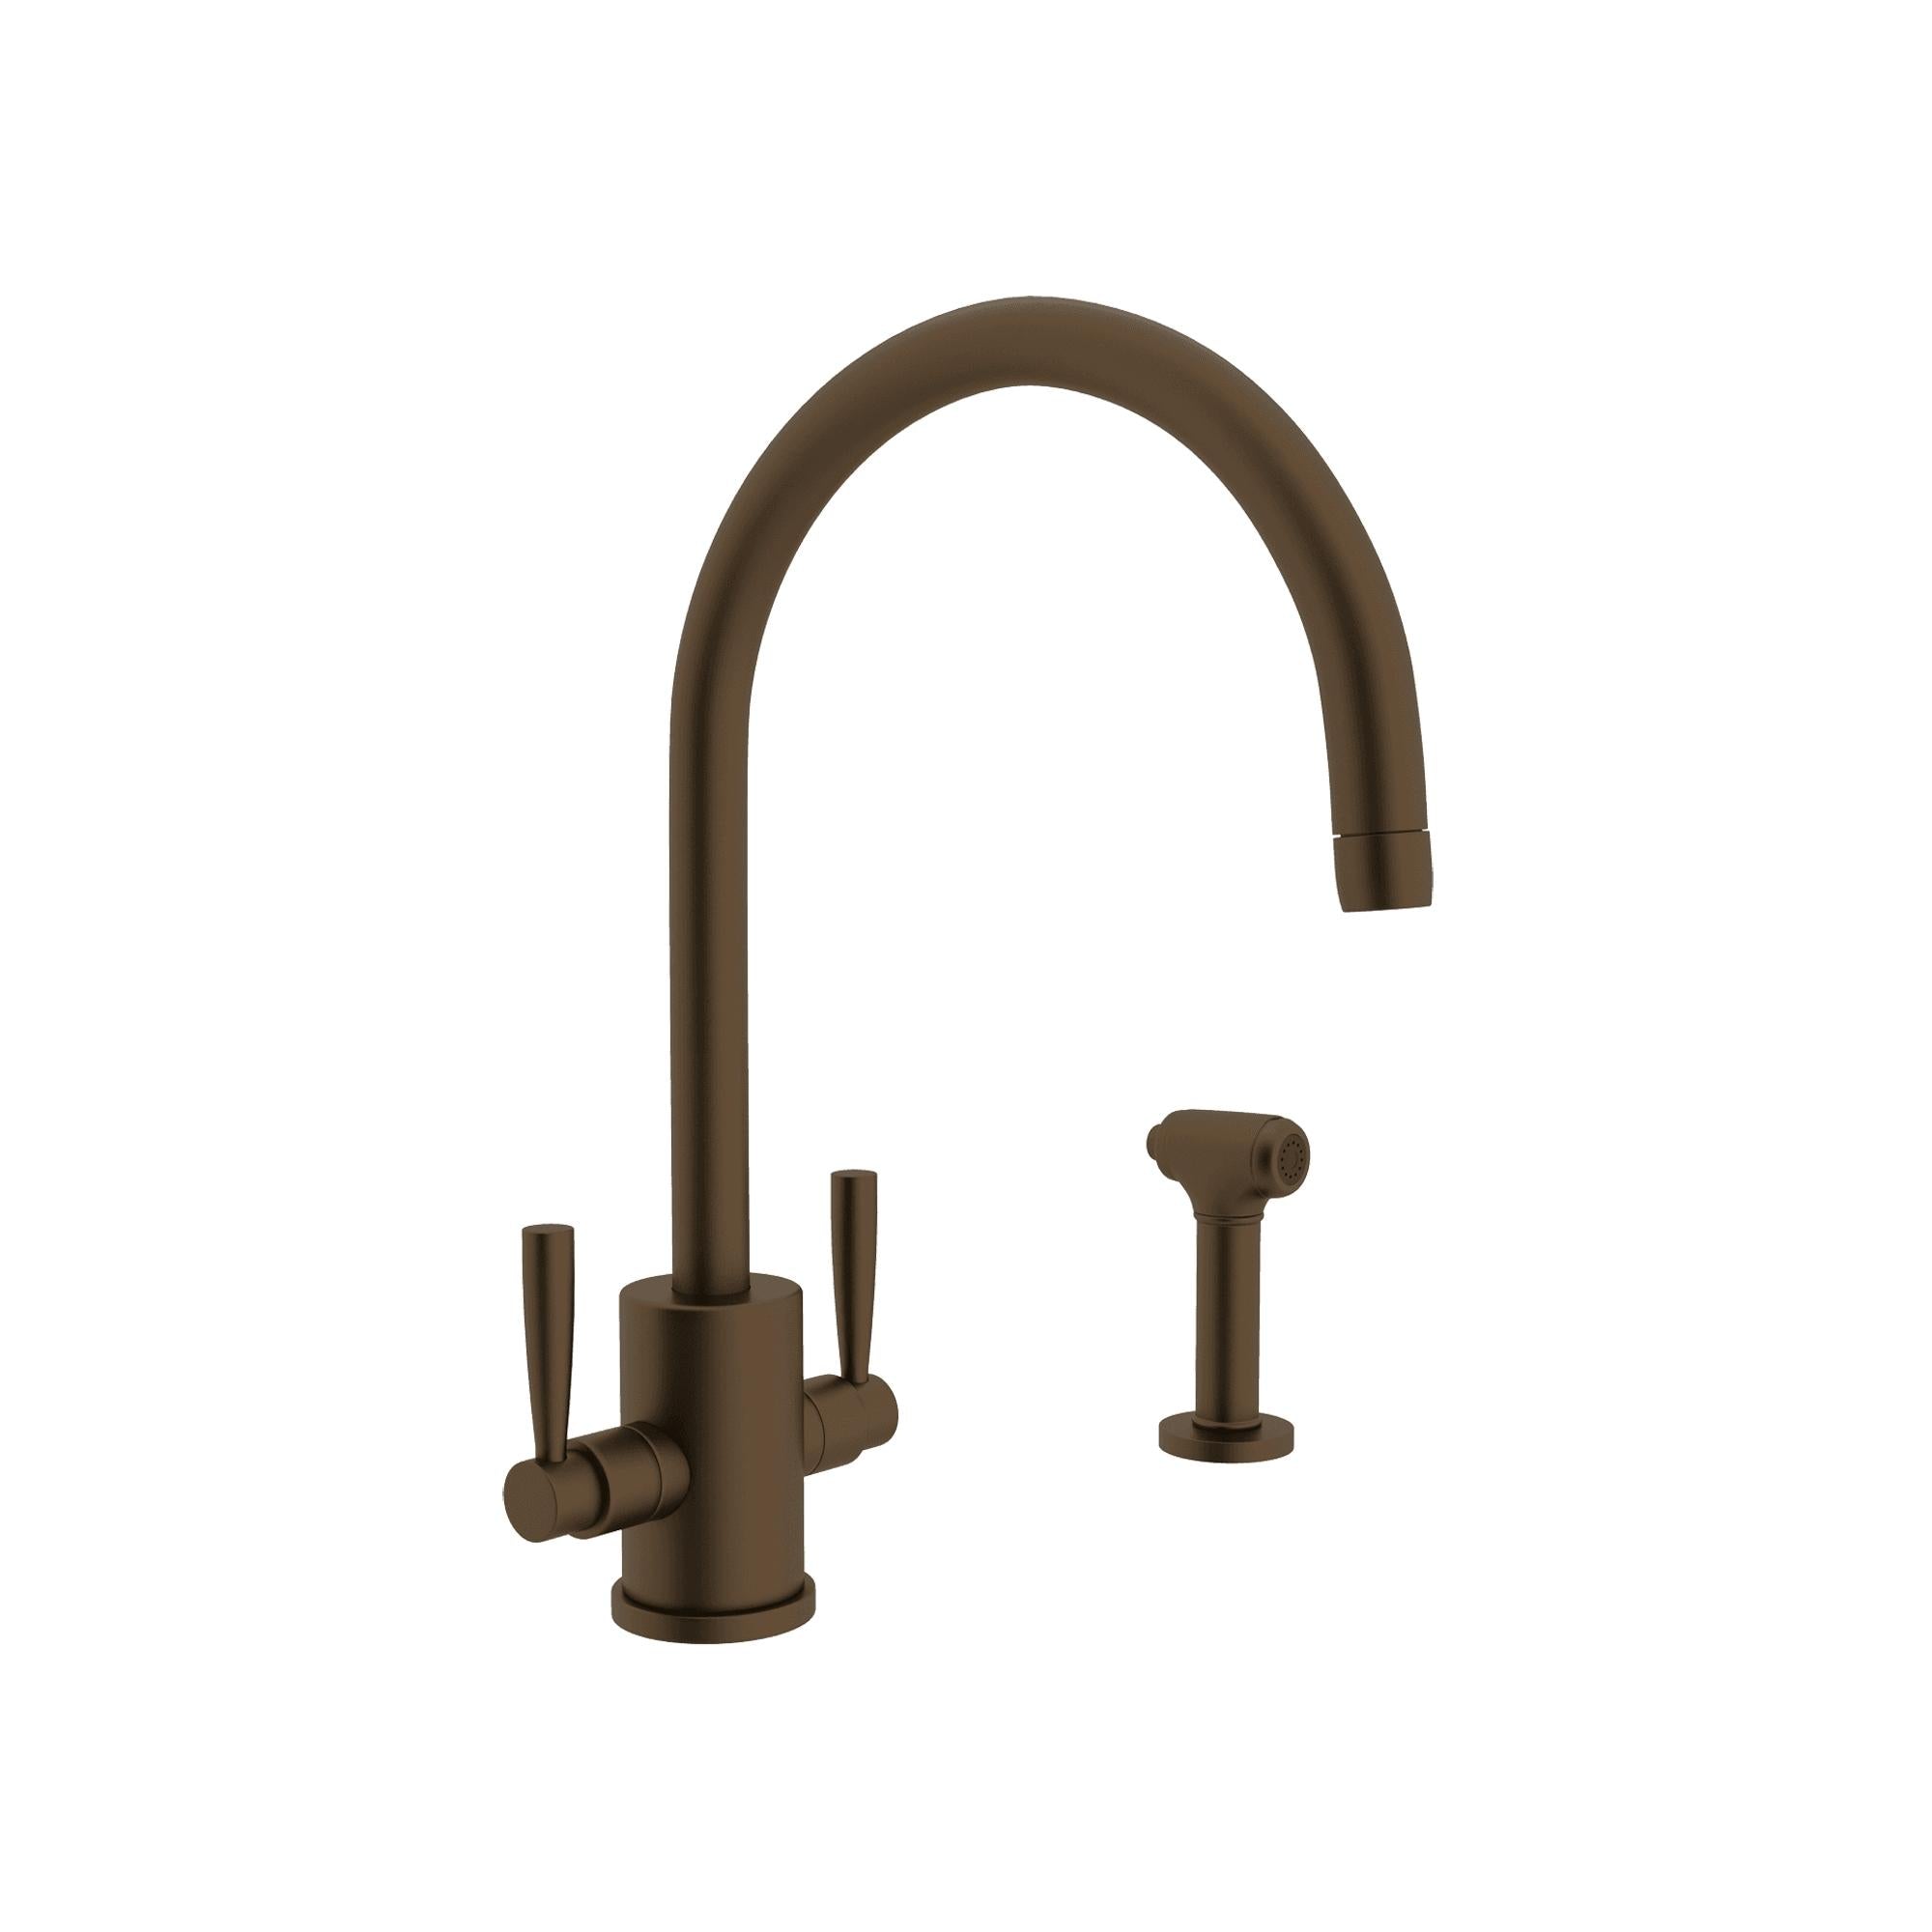 Perrin & Rowe U.4312 Holborn Two Handle Kitchen Faucet With C-Spout and Side Spray